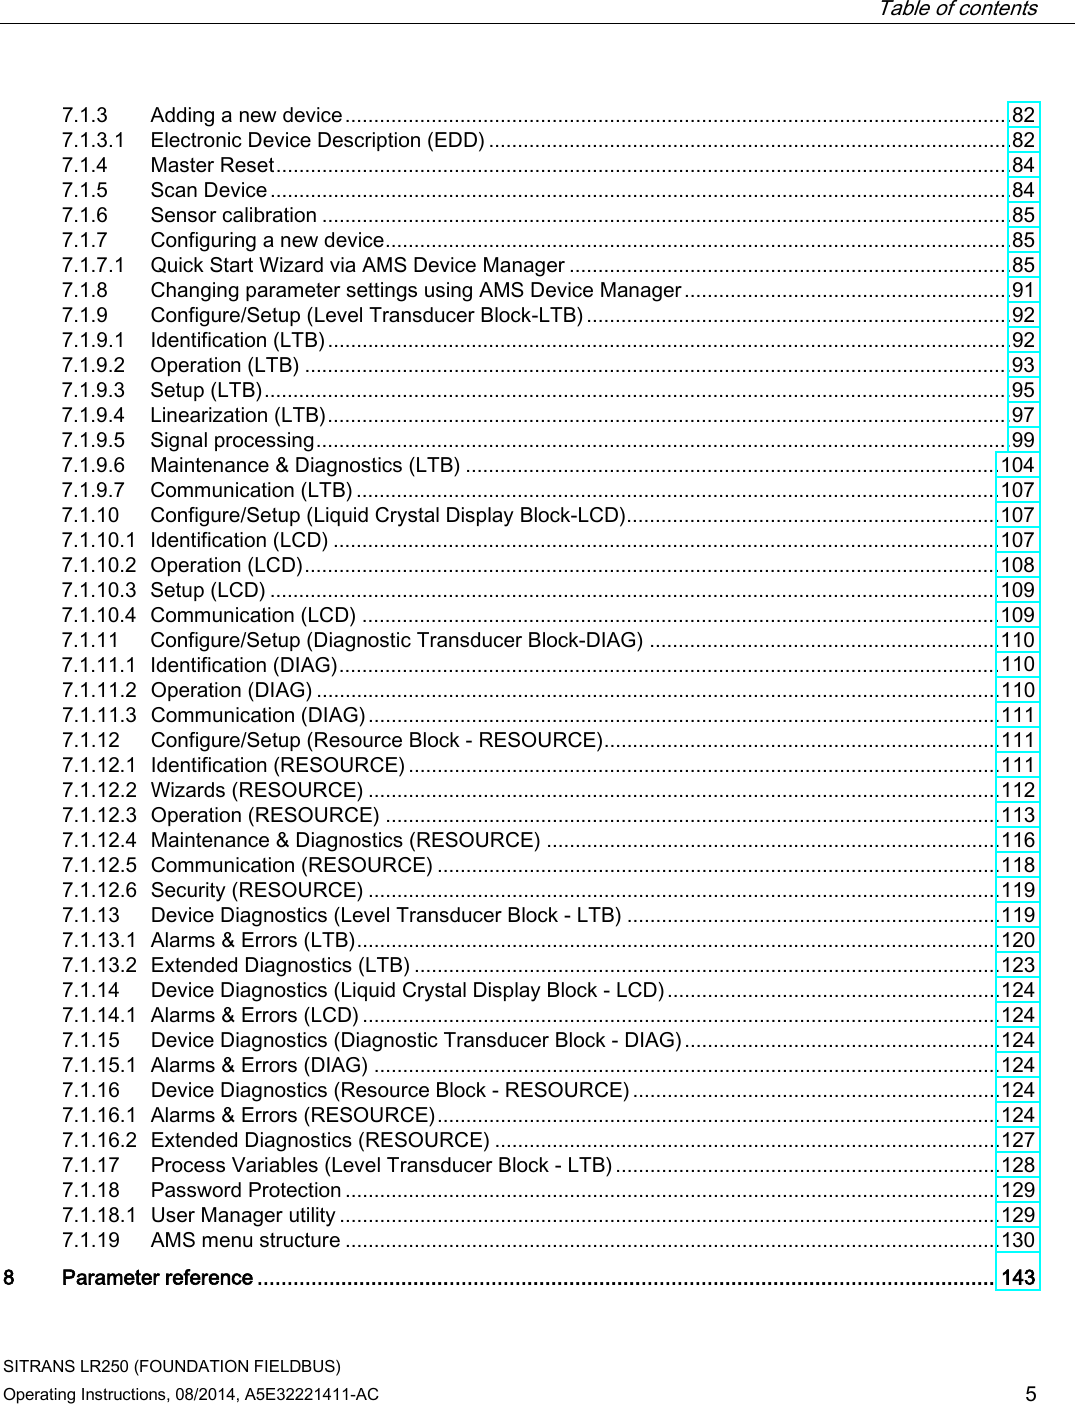  Table of contents   SITRANS LR250 (FOUNDATION FIELDBUS) Operating Instructions, 08/2014, A5E32221411-AC 5 7.1.3 Adding a new device .................................................................................................................... 82 7.1.3.1 Electronic Device Description (EDD) ........................................................................................... 82 7.1.4 Master Reset ................................................................................................................................ 84 7.1.5 Scan Device ................................................................................................................................. 84 7.1.6 Sensor calibration ........................................................................................................................ 85 7.1.7 Configuring a new device ............................................................................................................. 85 7.1.7.1 Quick Start Wizard via AMS Device Manager ............................................................................. 85 7.1.8 Changing parameter settings using AMS Device Manager ......................................................... 91 7.1.9 Configure/Setup (Level Transducer Block-LTB) .......................................................................... 92 7.1.9.1 Identification (LTB) ....................................................................................................................... 92 7.1.9.2 Operation (LTB) ........................................................................................................................... 93 7.1.9.3 Setup (LTB) .................................................................................................................................. 95 7.1.9.4 Linearization (LTB) ....................................................................................................................... 97 7.1.9.5 Signal processing ......................................................................................................................... 99 7.1.9.6 Maintenance &amp; Diagnostics (LTB) ............................................................................................. 104 7.1.9.7 Communication (LTB) ................................................................................................................ 107 7.1.10 Configure/Setup (Liquid Crystal Display Block-LCD)................................................................. 107 7.1.10.1 Identification (LCD) .................................................................................................................... 107 7.1.10.2 Operation (LCD) ......................................................................................................................... 108 7.1.10.3 Setup (LCD) ............................................................................................................................... 109 7.1.10.4 Communication (LCD) ............................................................................................................... 109 7.1.11 Configure/Setup (Diagnostic Transducer Block-DIAG) ............................................................. 110 7.1.11.1 Identification (DIAG) ................................................................................................................... 110 7.1.11.2 Operation (DIAG) ....................................................................................................................... 110 7.1.11.3 Communication (DIAG) .............................................................................................................. 111 7.1.12 Configure/Setup (Resource Block - RESOURCE) ..................................................................... 111 7.1.12.1 Identification (RESOURCE) ....................................................................................................... 111 7.1.12.2 Wizards (RESOURCE) .............................................................................................................. 112 7.1.12.3 Operation (RESOURCE) ........................................................................................................... 113 7.1.12.4 Maintenance &amp; Diagnostics (RESOURCE) ............................................................................... 116 7.1.12.5 Communication (RESOURCE) .................................................................................................. 118 7.1.12.6 Security (RESOURCE) .............................................................................................................. 119 7.1.13 Device Diagnostics (Level Transducer Block - LTB) ................................................................. 119 7.1.13.1 Alarms &amp; Errors (LTB) ................................................................................................................ 120 7.1.13.2 Extended Diagnostics (LTB) ...................................................................................................... 123 7.1.14 Device Diagnostics (Liquid Crystal Display Block - LCD) .......................................................... 124 7.1.14.1 Alarms &amp; Errors (LCD) ............................................................................................................... 124 7.1.15 Device Diagnostics (Diagnostic Transducer Block - DIAG) ....................................................... 124 7.1.15.1 Alarms &amp; Errors (DIAG) ............................................................................................................. 124 7.1.16 Device Diagnostics (Resource Block - RESOURCE) ................................................................ 124 7.1.16.1  Alarms &amp; Errors (RESOURCE) .................................................................................................. 124 7.1.16.2 Extended Diagnostics (RESOURCE) ........................................................................................ 127 7.1.17 Process Variables (Level Transducer Block - LTB) ................................................................... 128 7.1.18 Password Protection .................................................................................................................. 129 7.1.18.1 User Manager utility ................................................................................................................... 129 7.1.19 AMS menu structure .................................................................................................................. 130 8  Parameter reference ........................................................................................................................... 143 